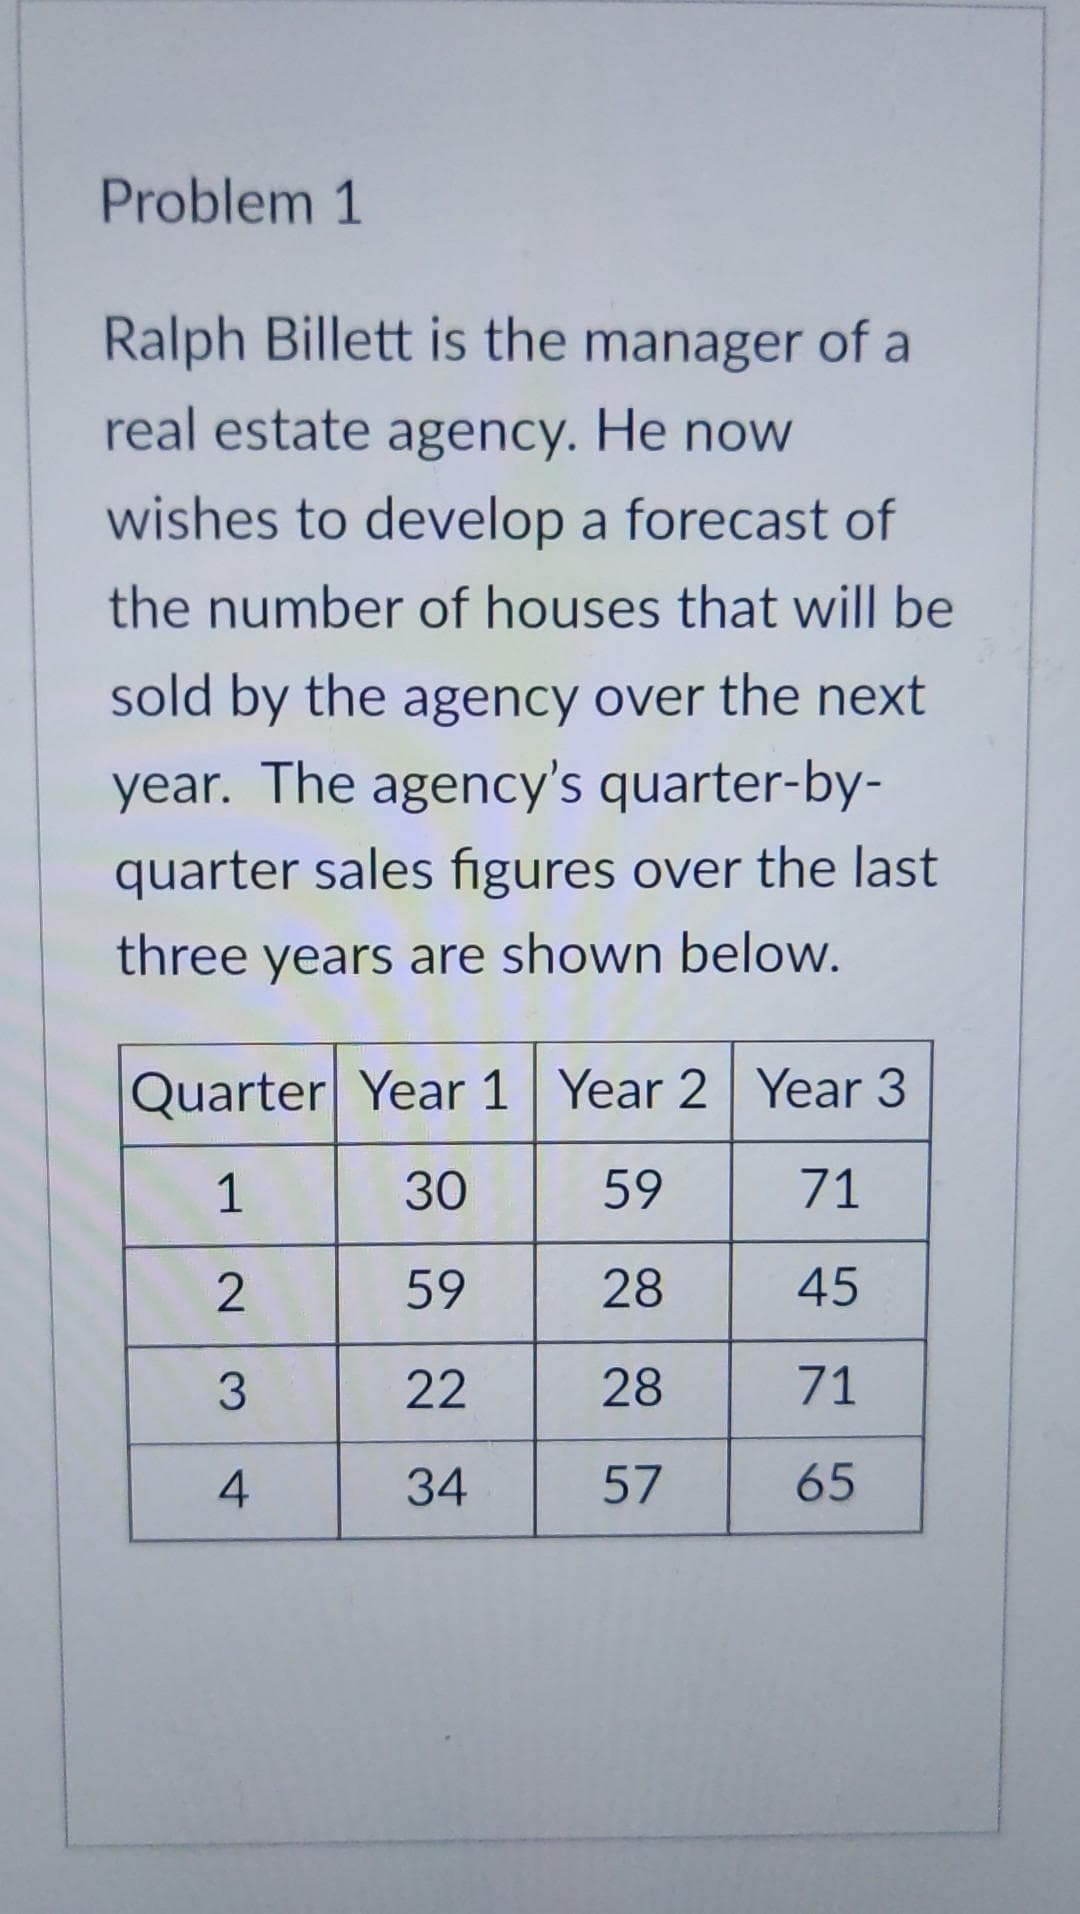 Problem 1
Ralph Billett is the manager of a
real estate agency. He noW
wishes to develop a forecast of
the number of houses that will be
sold by the agency over the next
year. The agency's quarter-by-
quarter sales figures over the last
three years are shown below.
Quarter Year 1 Year 2 Year 3
1
30
59
71
59
28
45
3
22
28
71
34
57
65
2.
